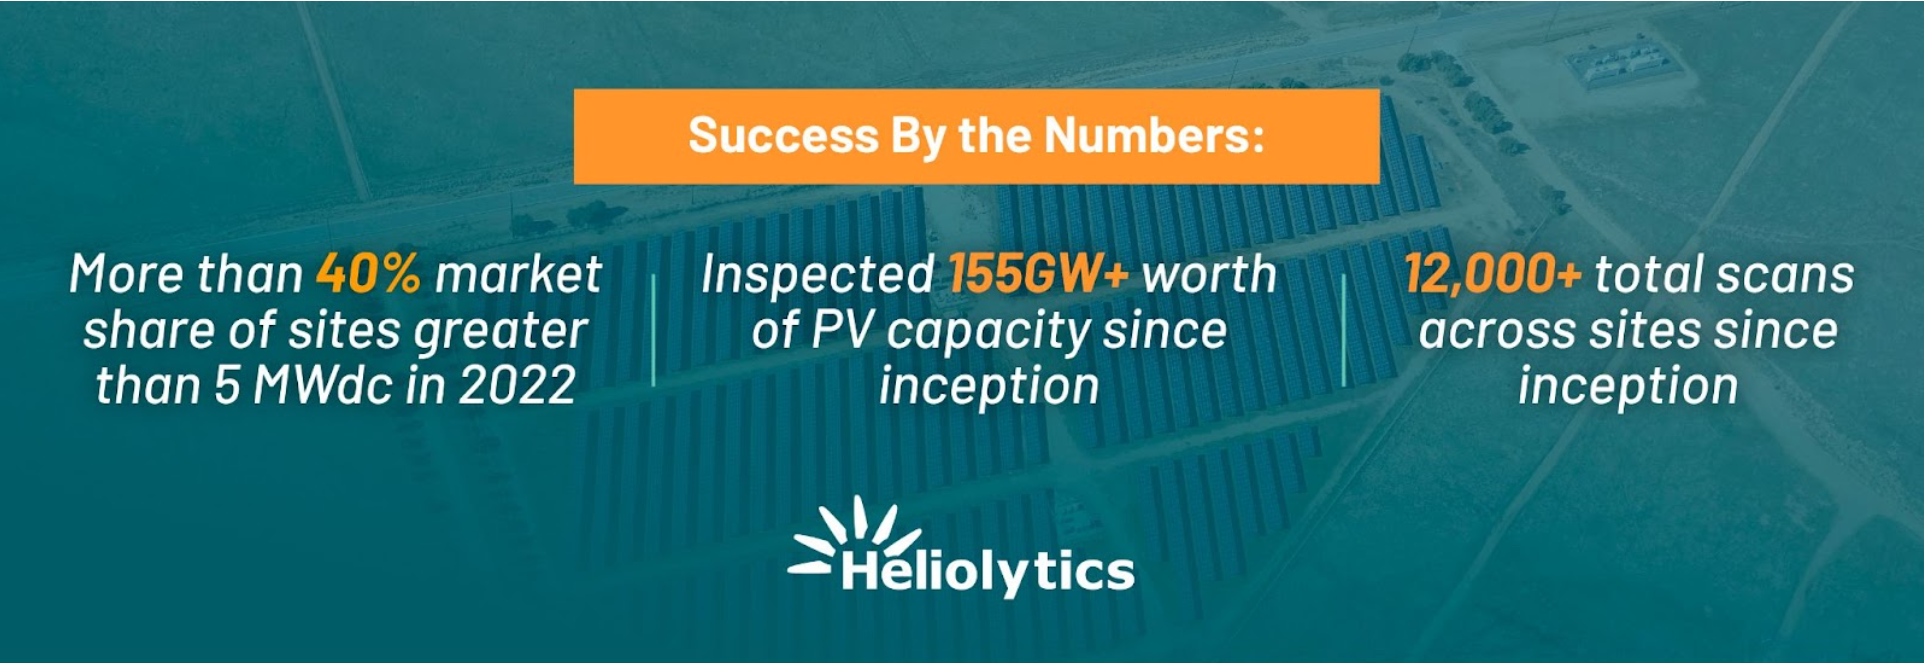 Success By the Numbers:  ·      More than 40% market share of sites greater than 5 MWdc in 2022 ·      Inspected 155GW+ worth of PV capacity since inception ·      12,000+ total scans across sites since inception